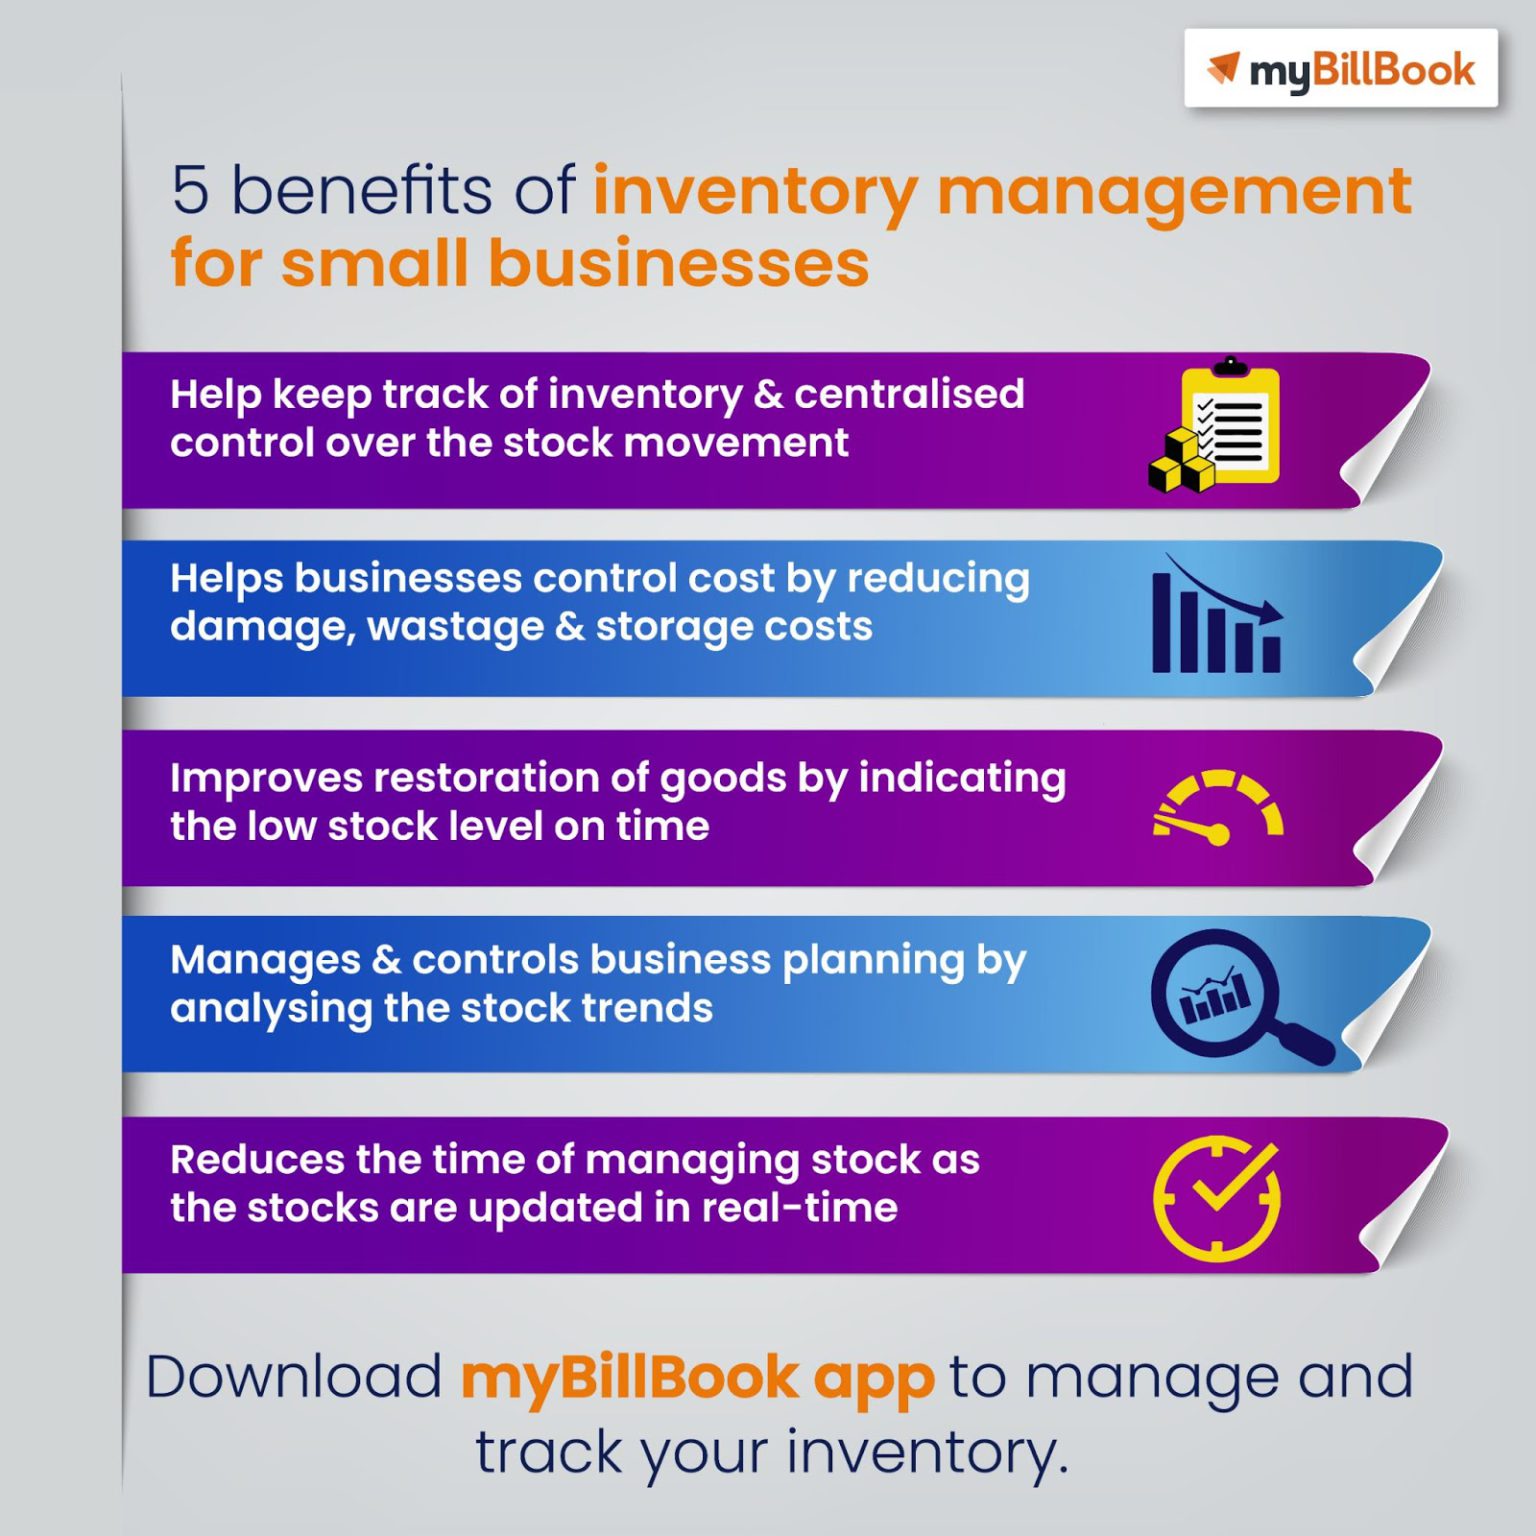 5-benefits-of-inventory-management-for-small-businesses-mybillbook